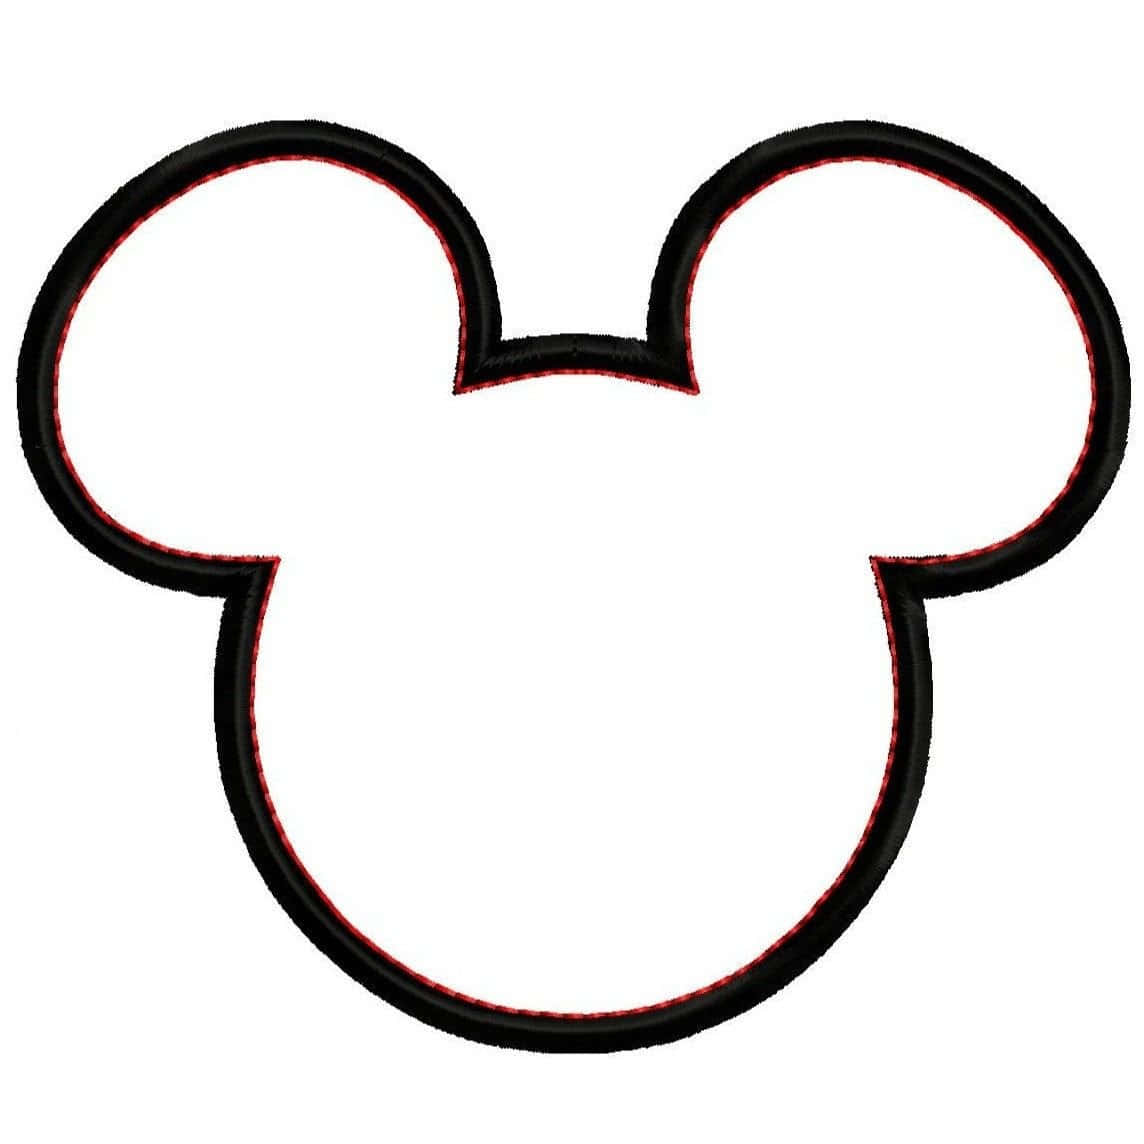 Show your Disney spirit with Mickey Mouse ears! Wallpaper